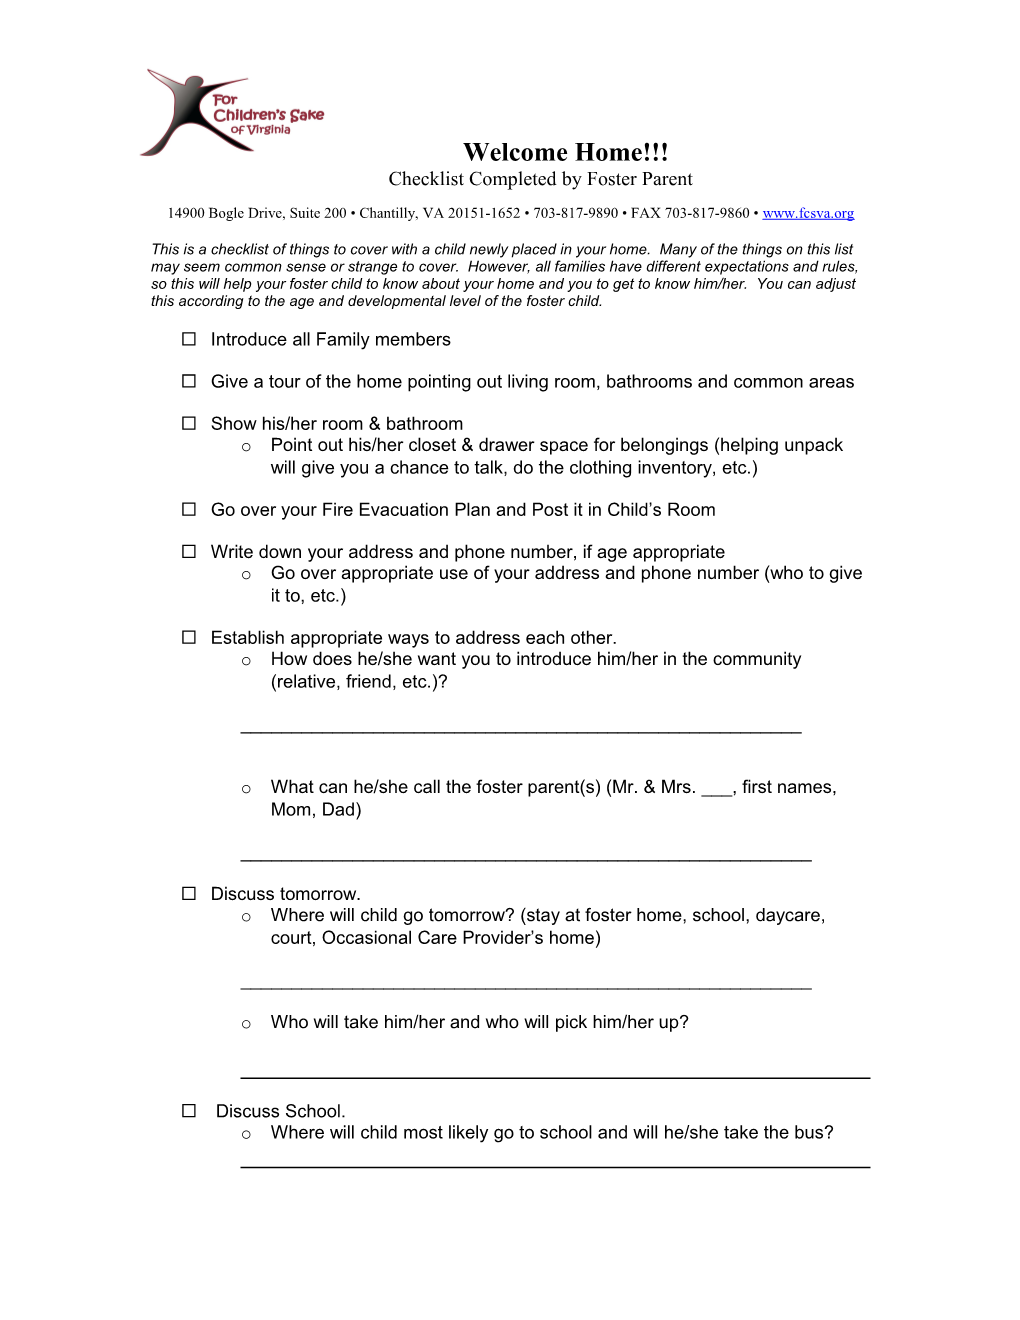 Checklist Completed by Foster Parent